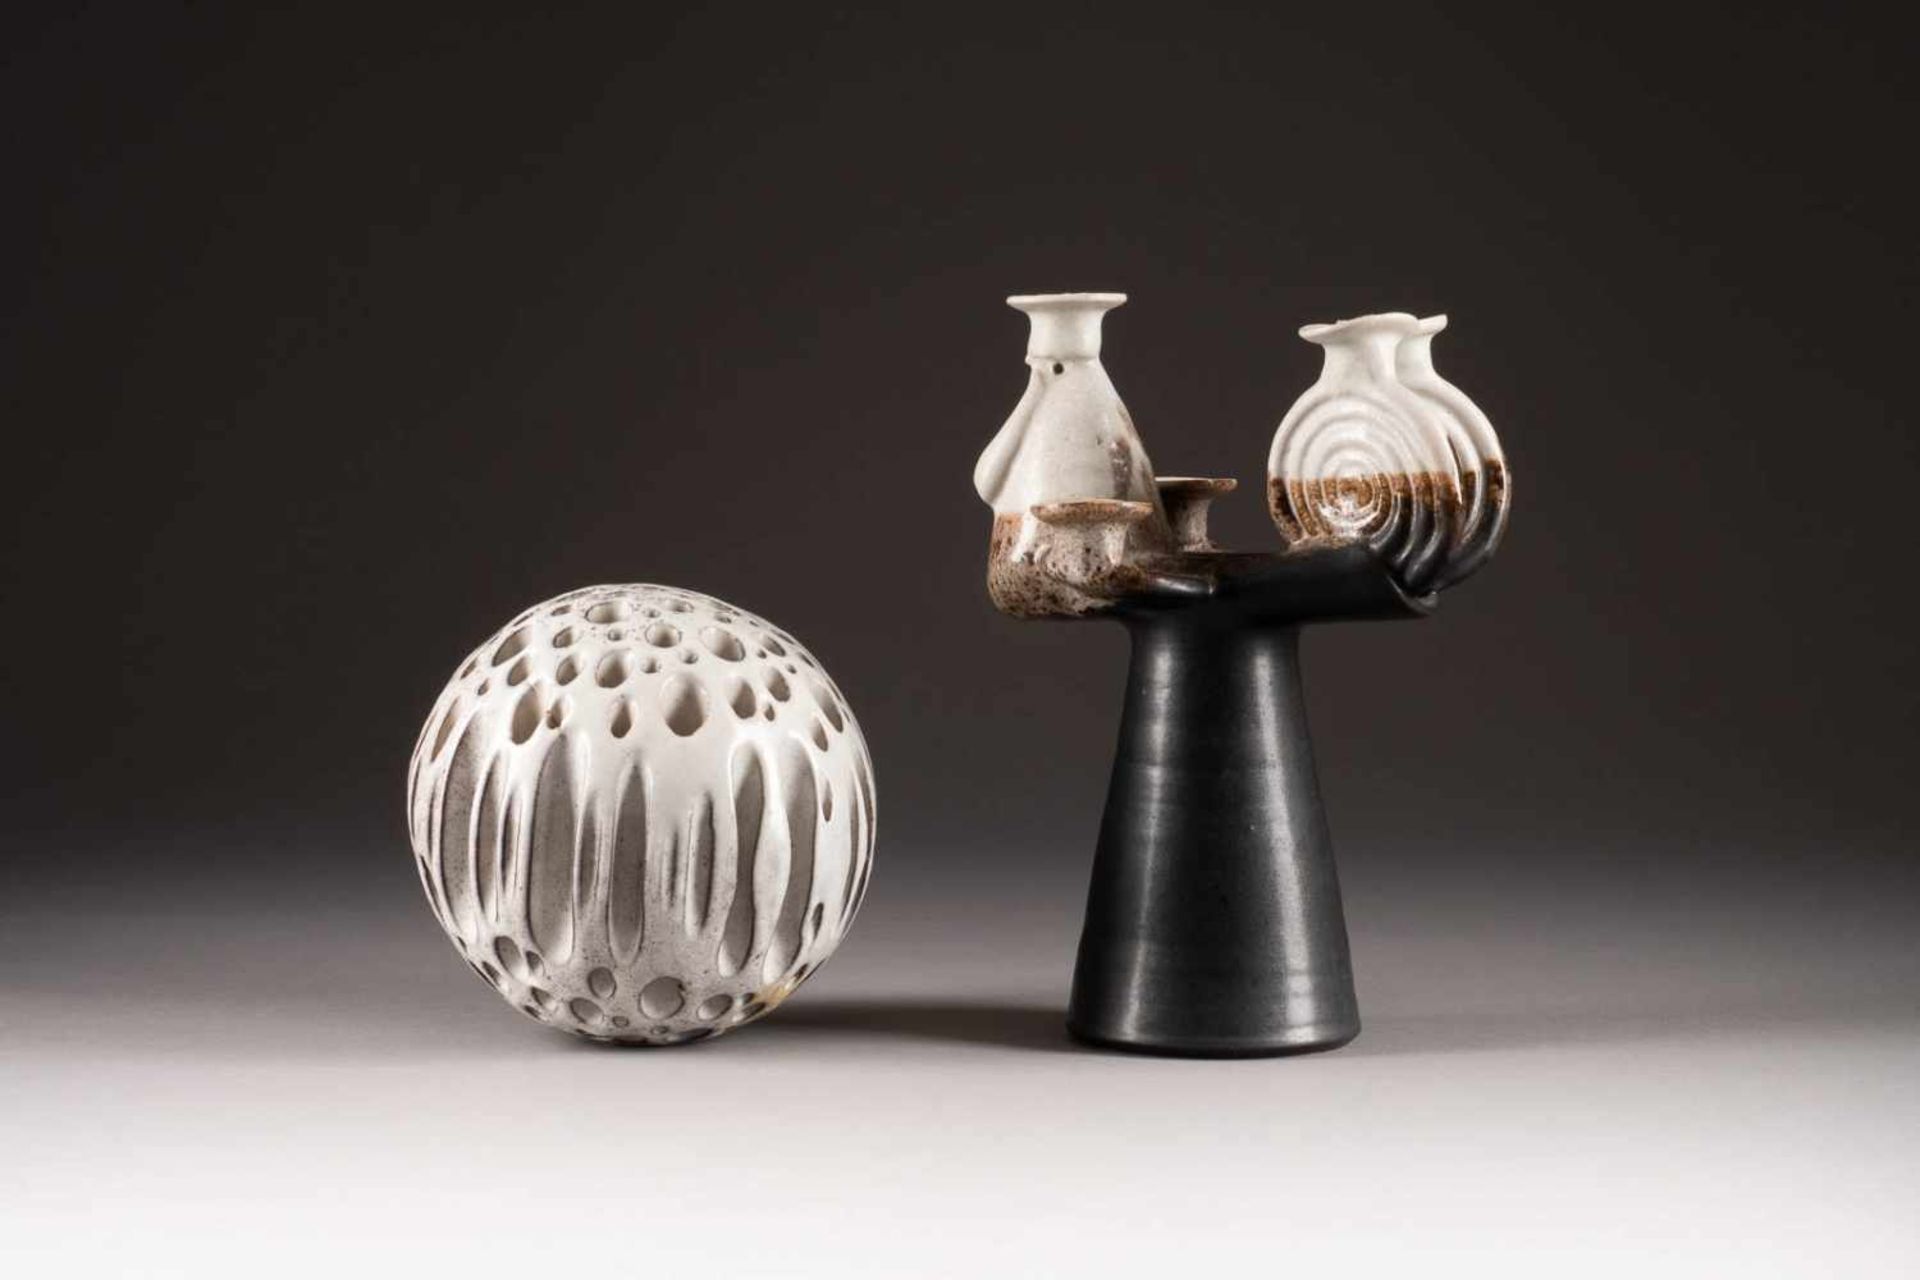 SPHERE AND CHANDELIERGerman, 2nd half of the 20th century Each object ceramic, white and brown